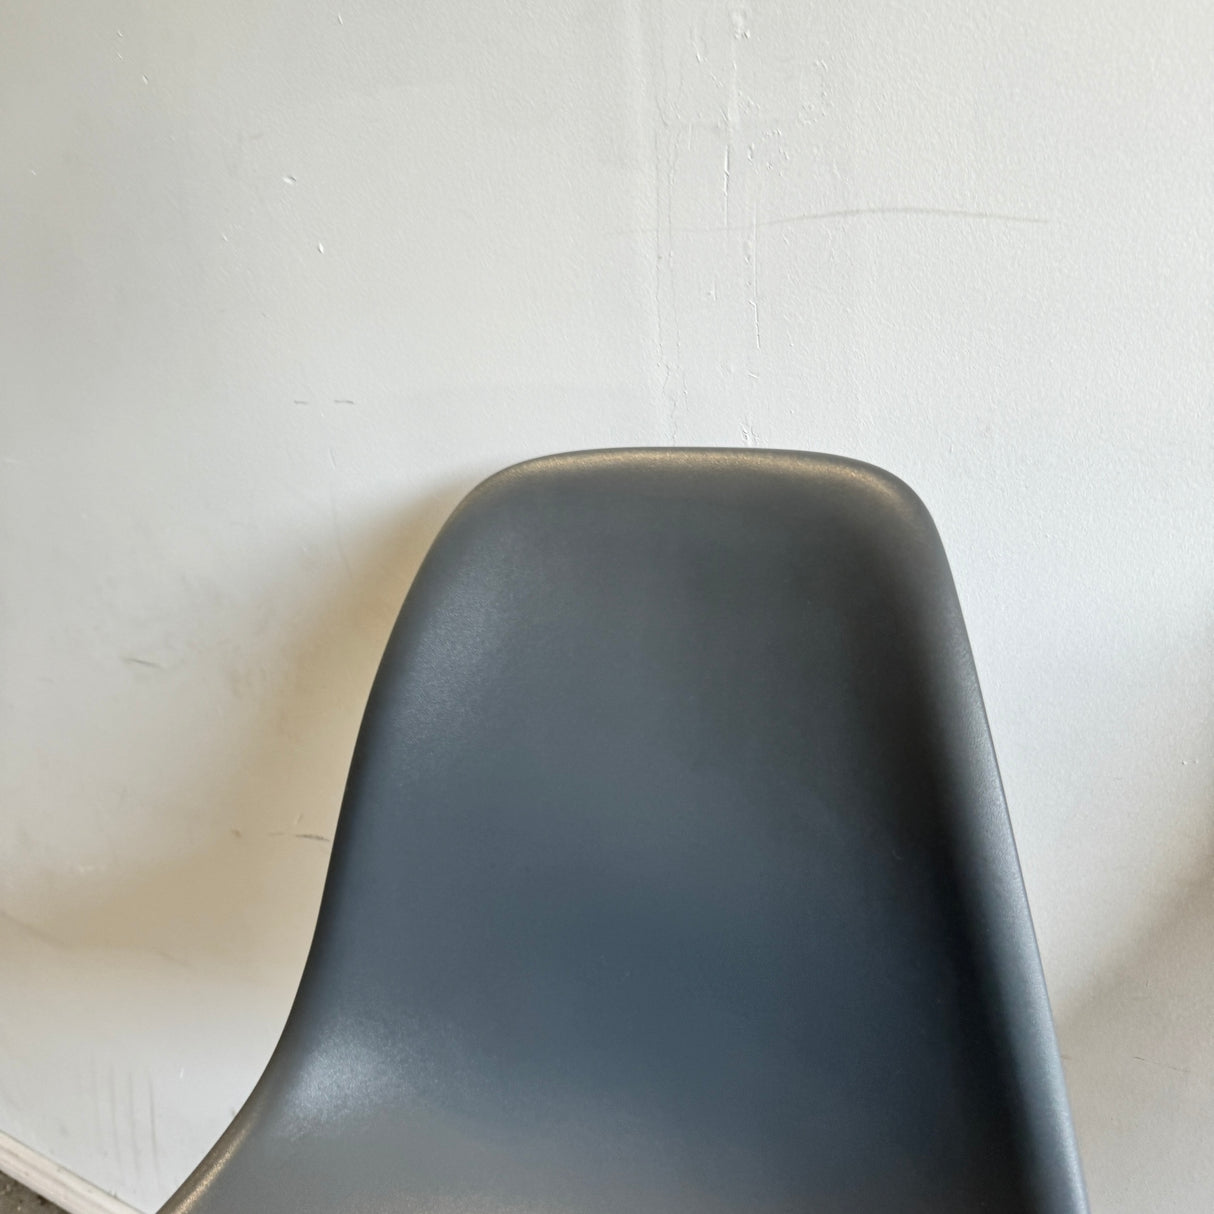 Authentic! Herman Miller Eames Molded Plastic Barstools (Gray)